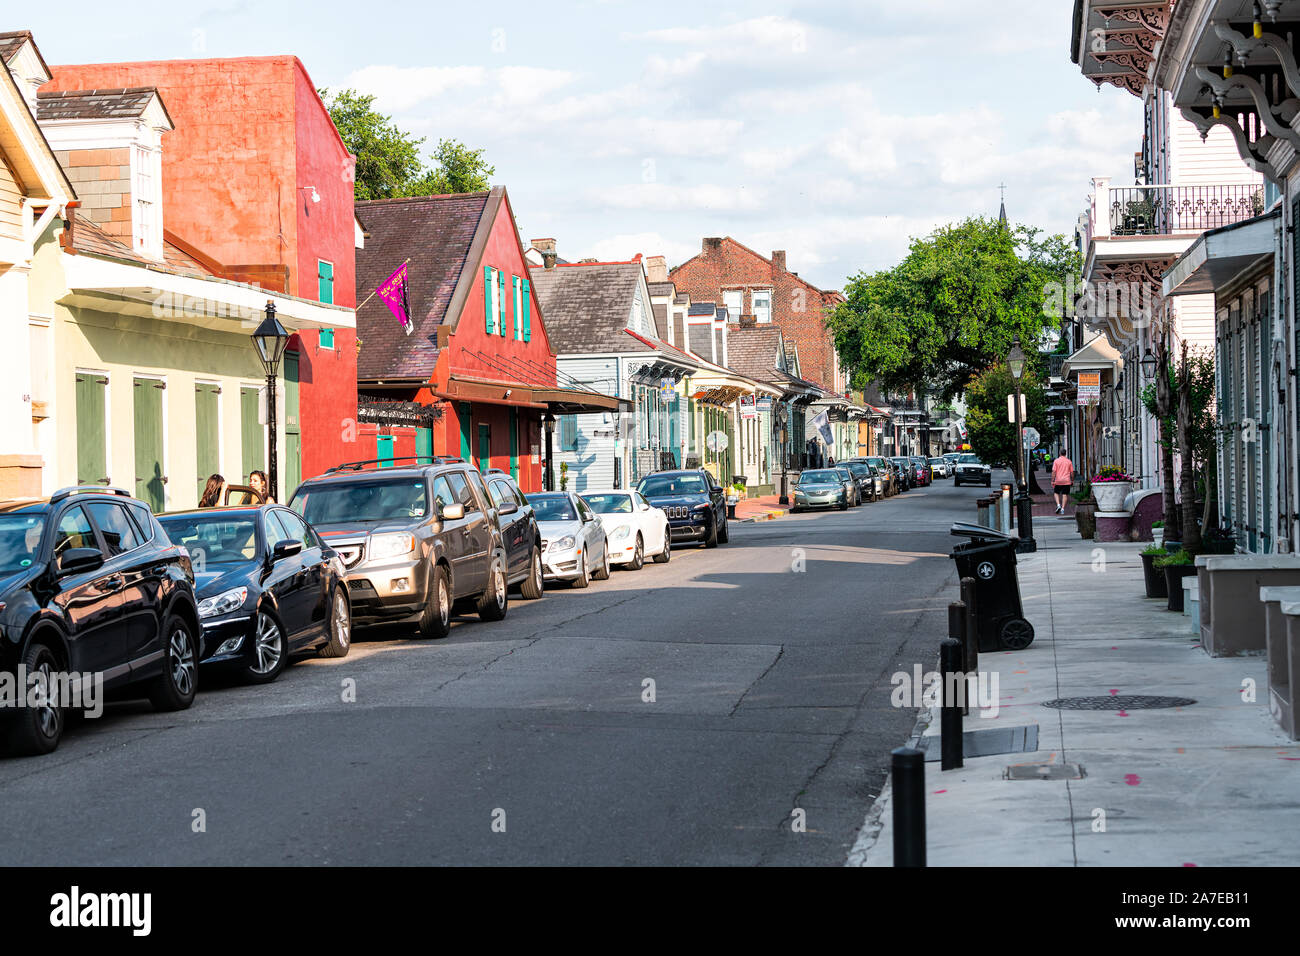 New Orleans, USA - April 23, 2018: Old town Orleans street sidewalk in Louisiana famous town with row of red colorful buildings homes and parked cars Stock Photo